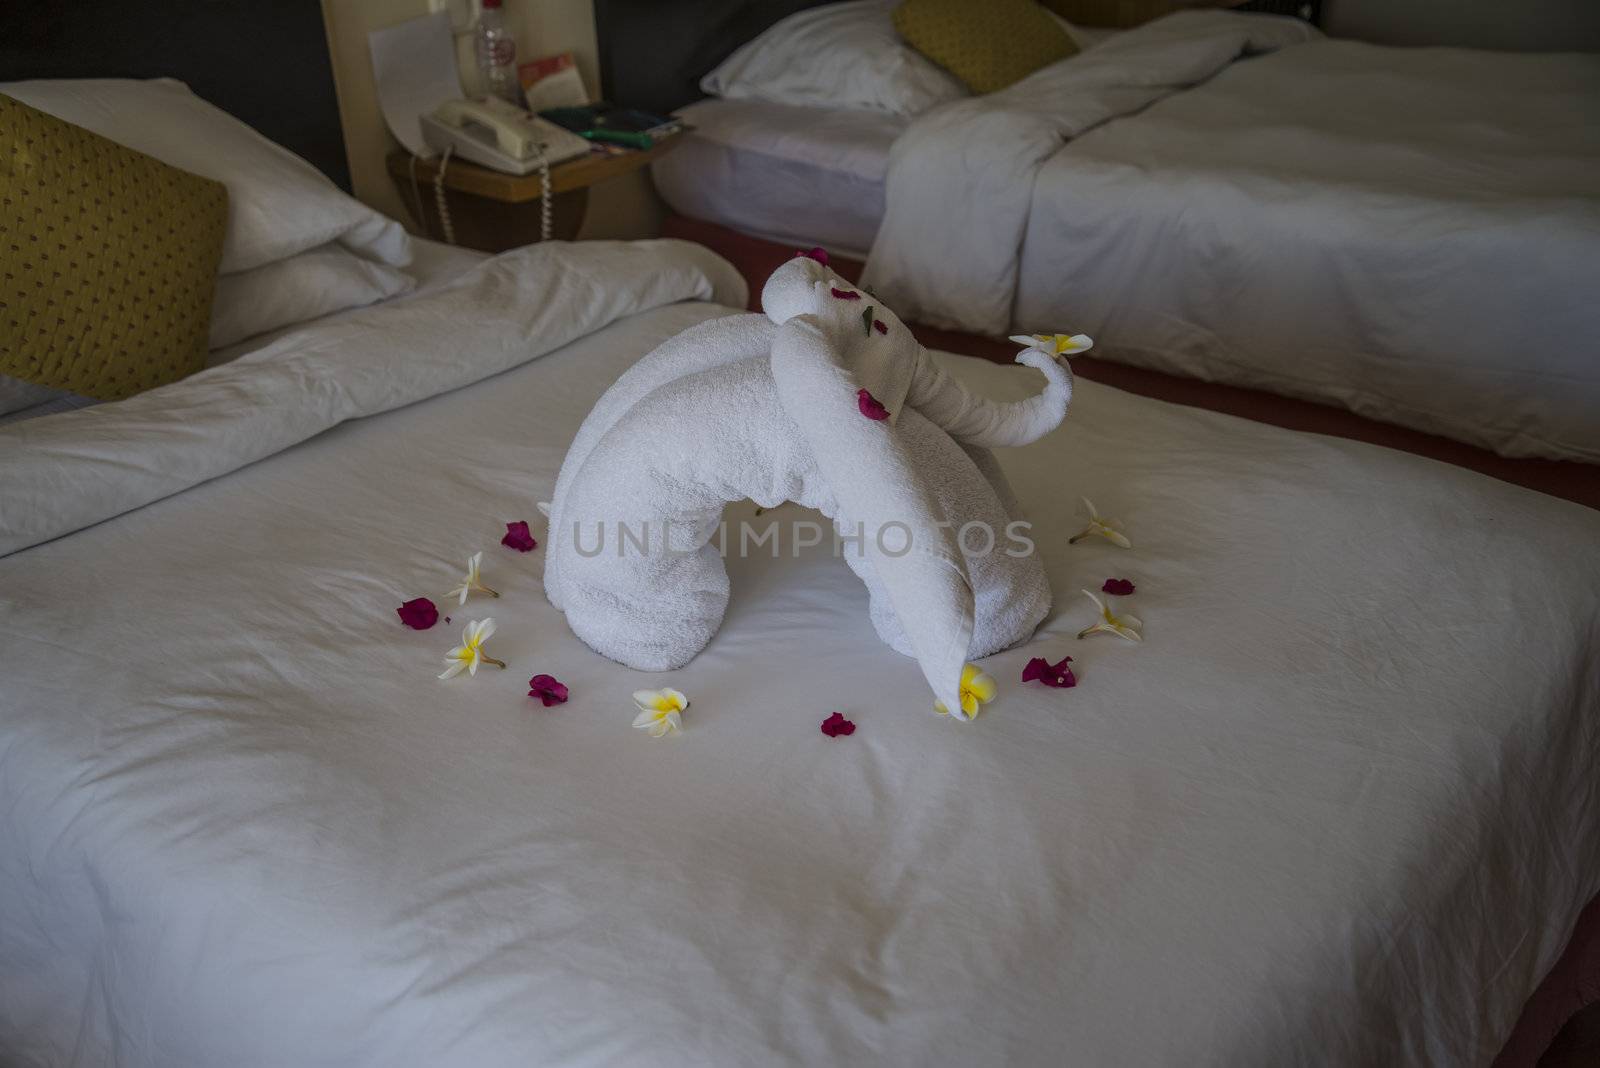 funny shape on the bed, elephant by steirus